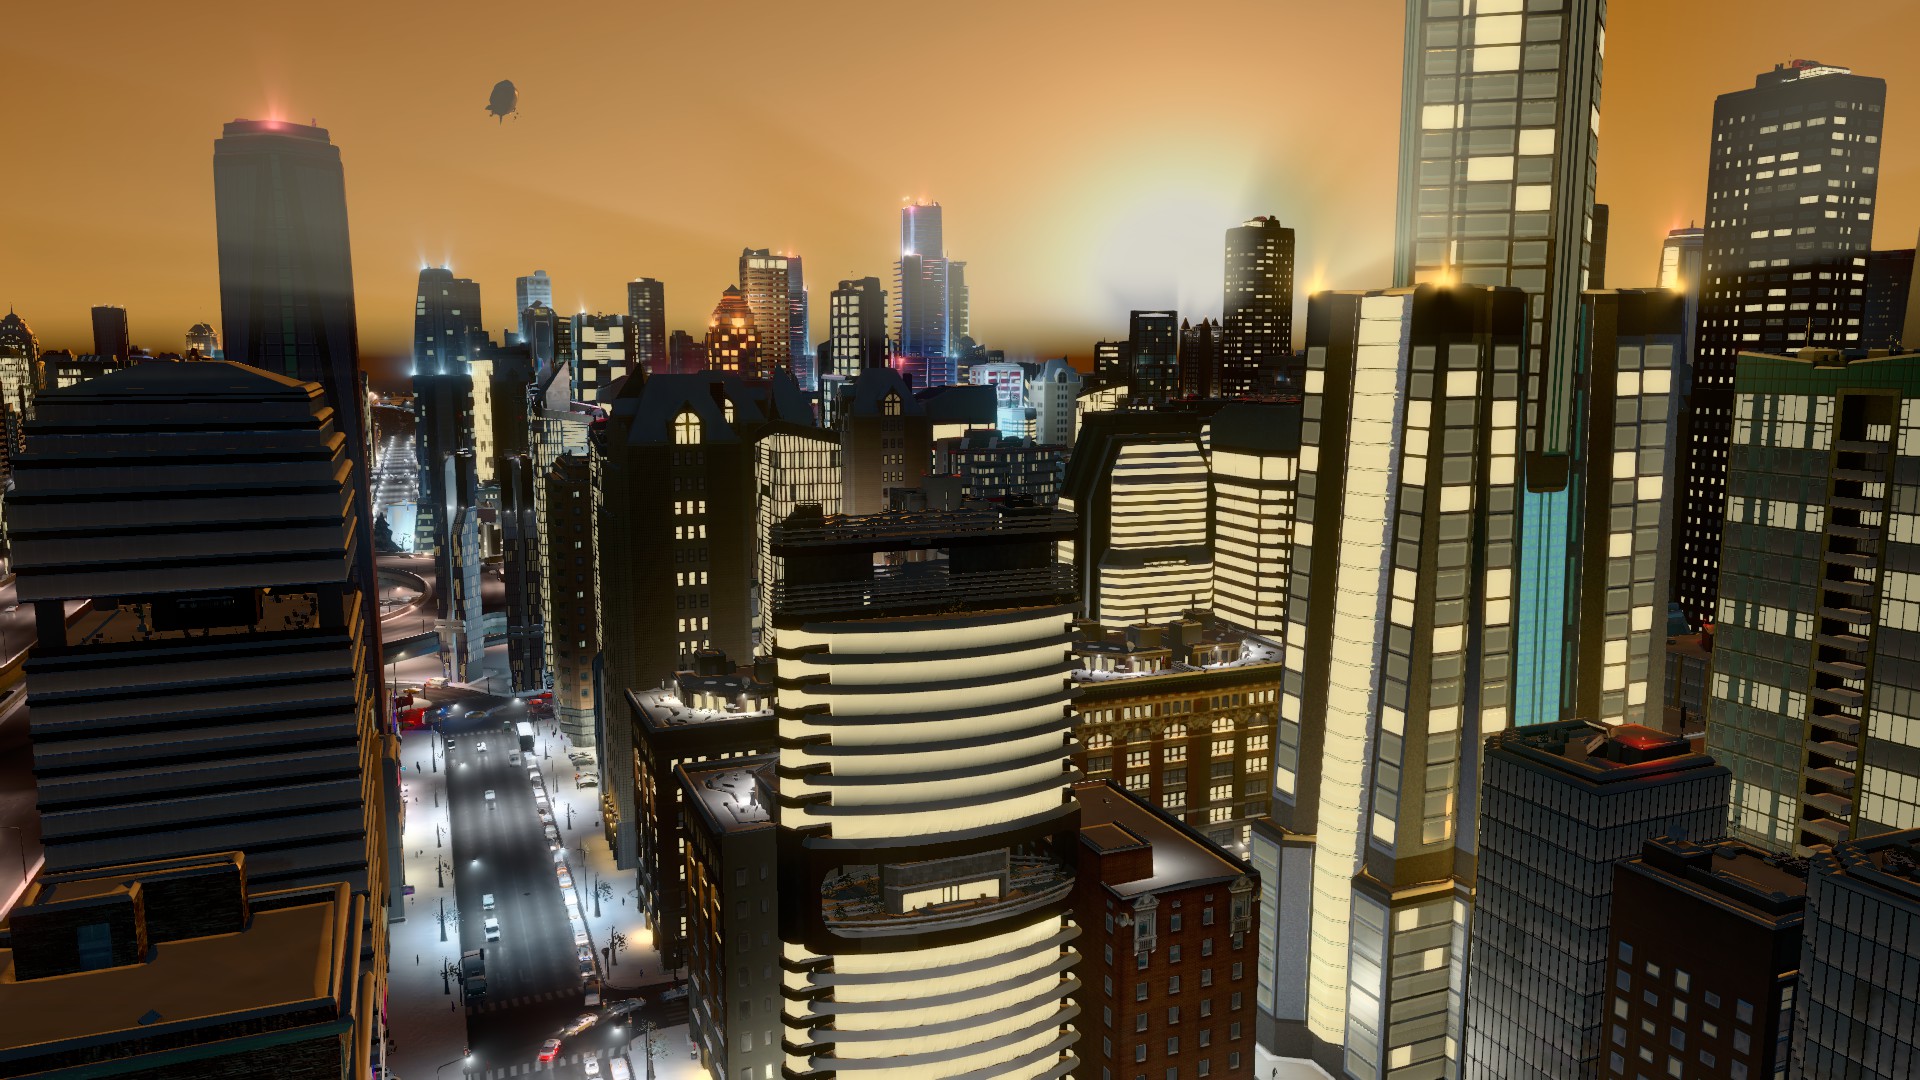 Cities: Skylines Wallpapers, Pictures, Images